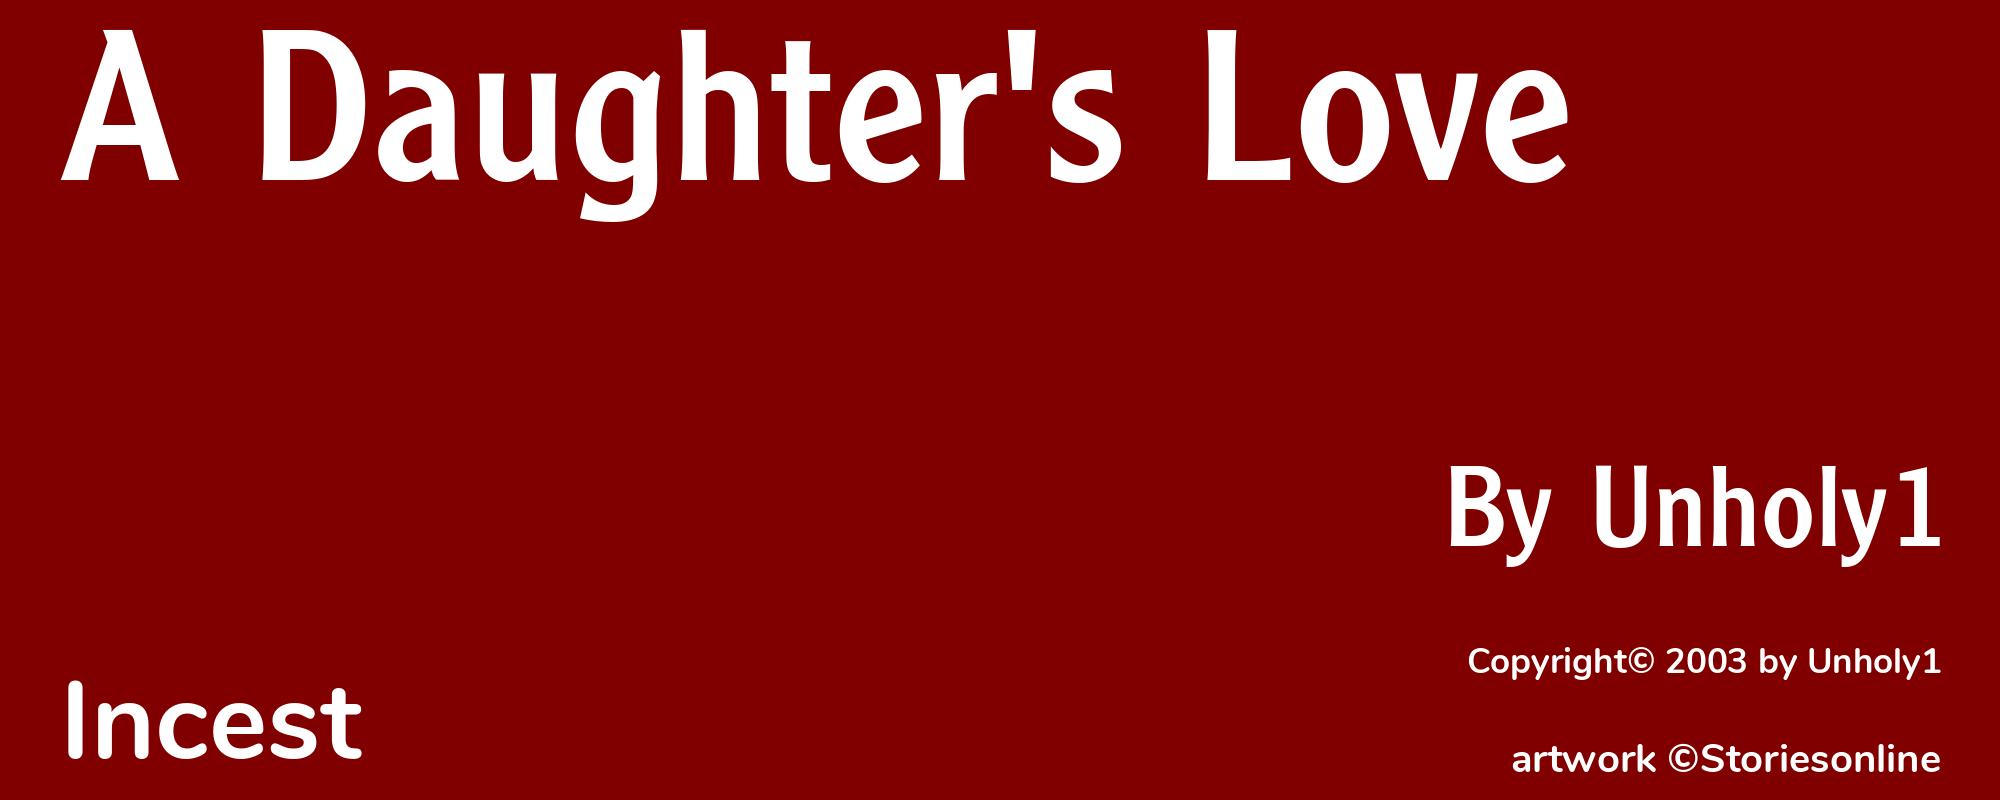 A Daughter's Love - Cover